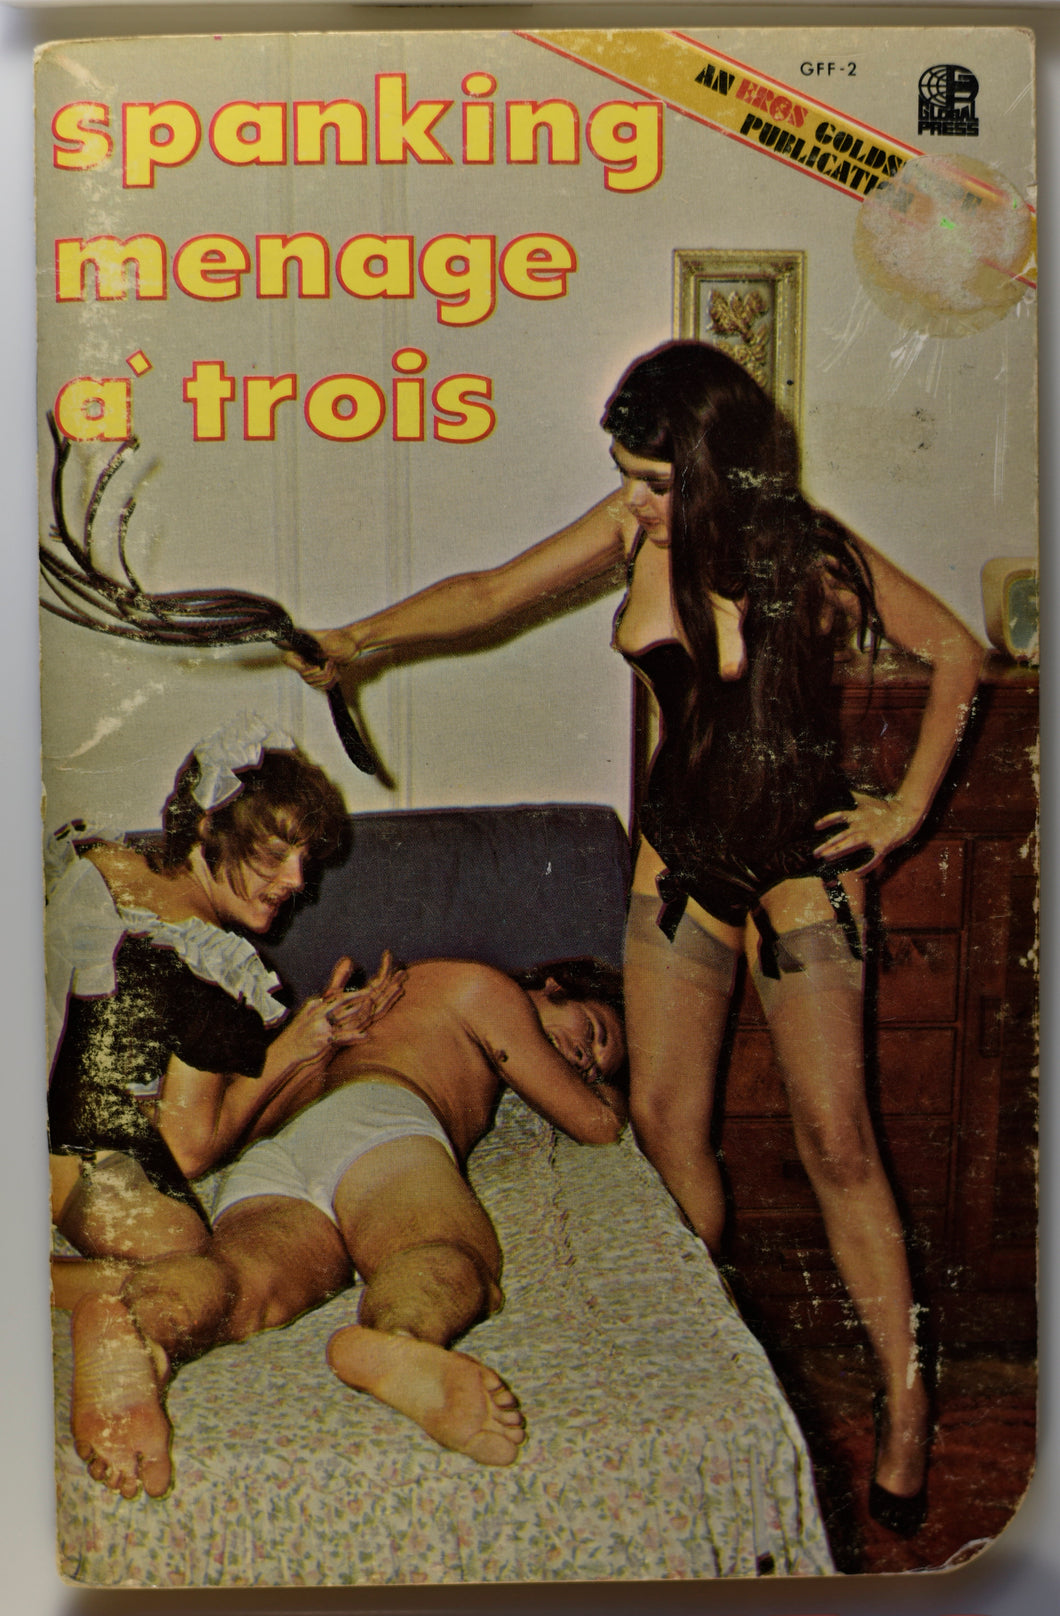 SPANKING MENAGE A TROIS COVER